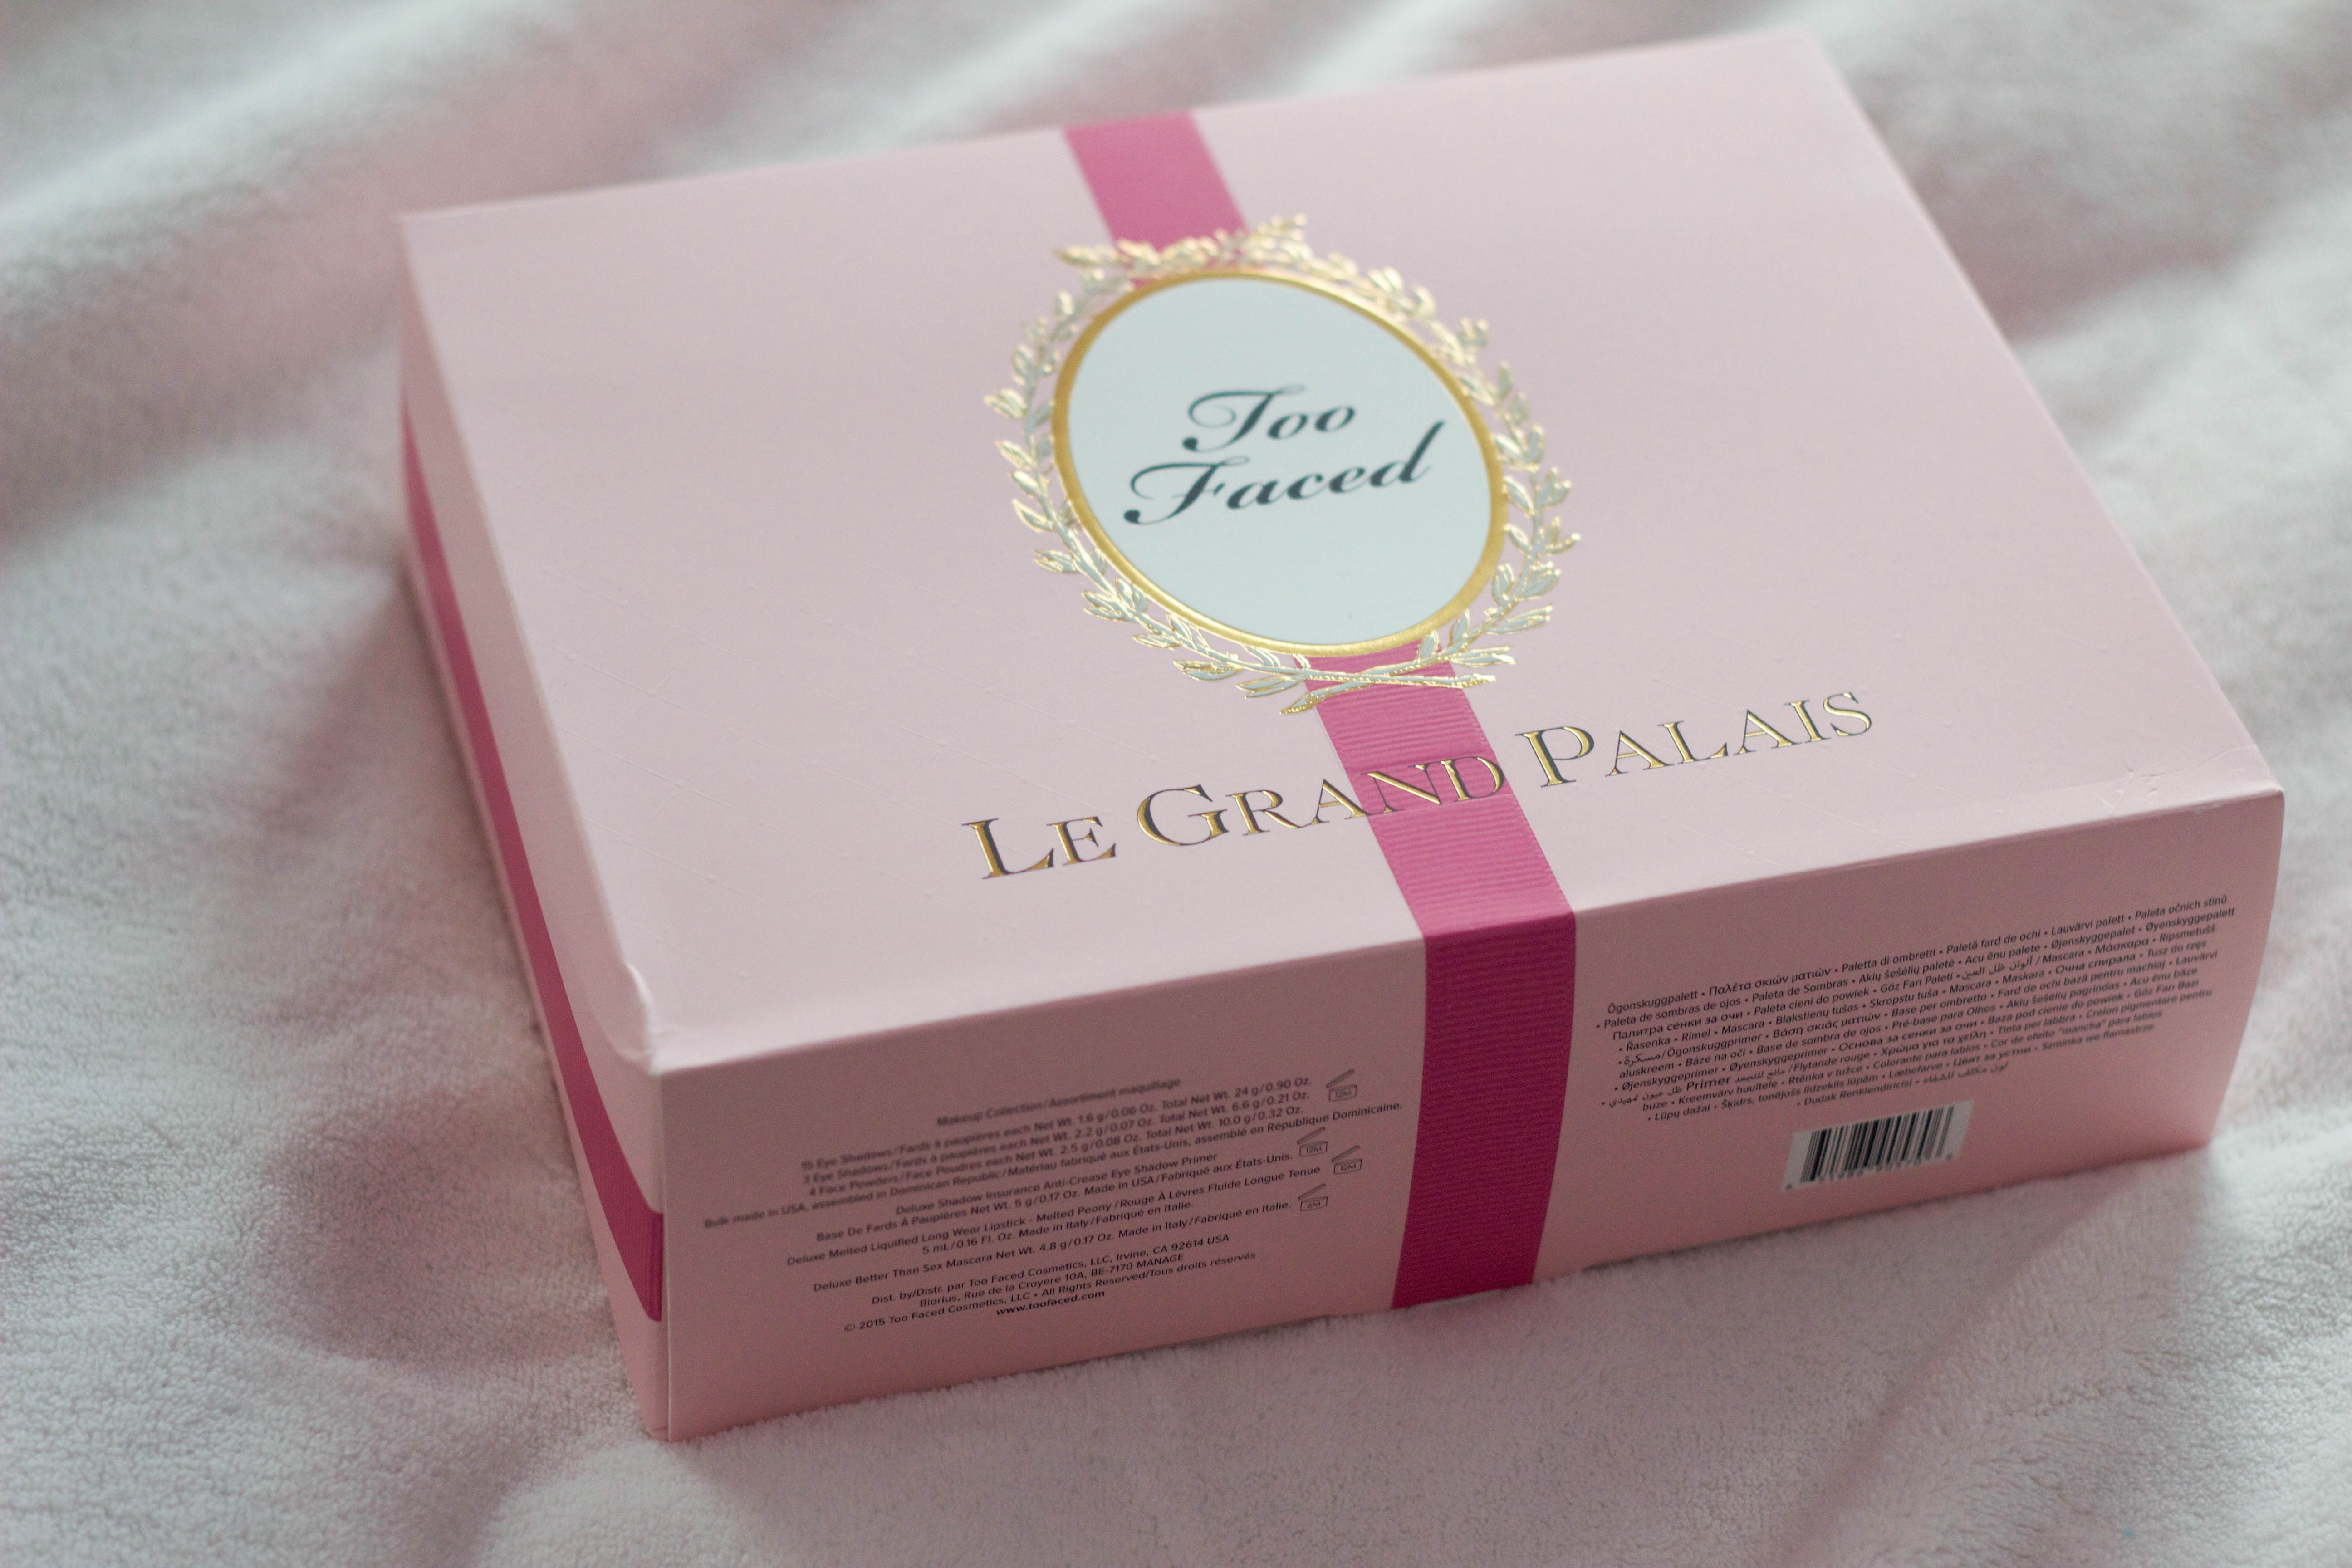 Too Faced Le Grand Palais Review